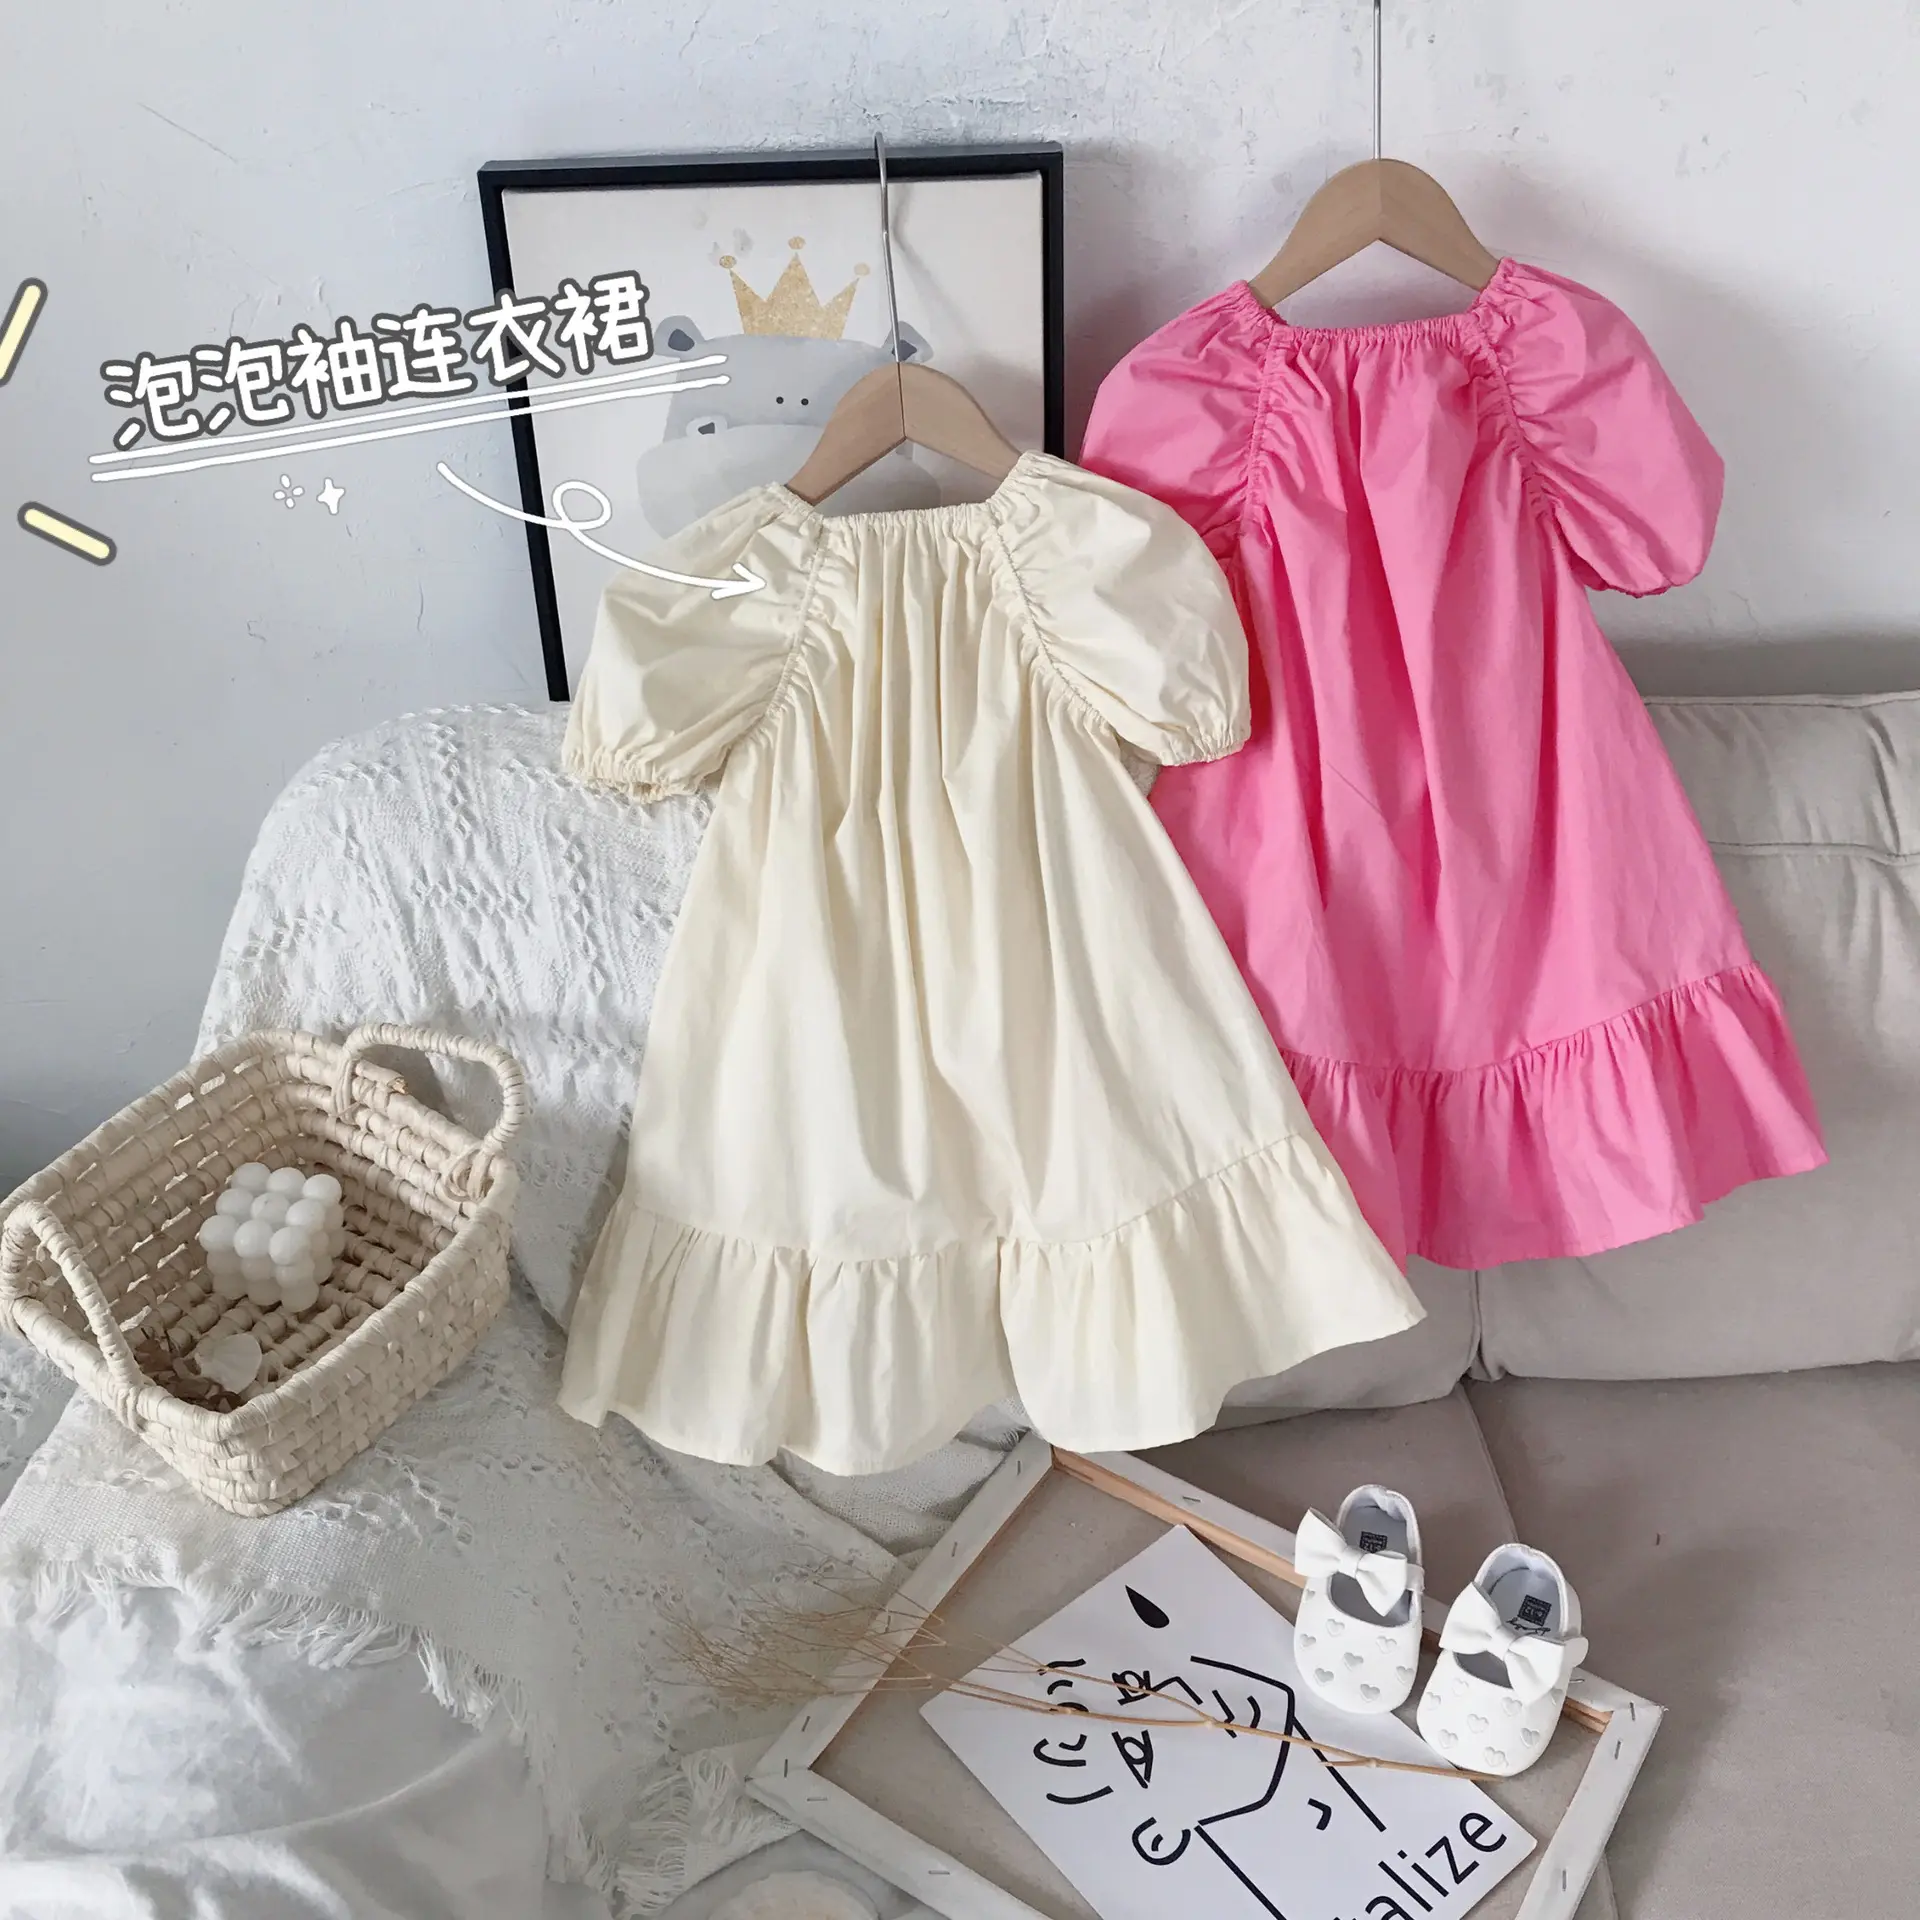 Hot Baby Clothes Kids Summer Soft Dresses Baby Girls Plain Pink Casual Short Sleeve Dresses